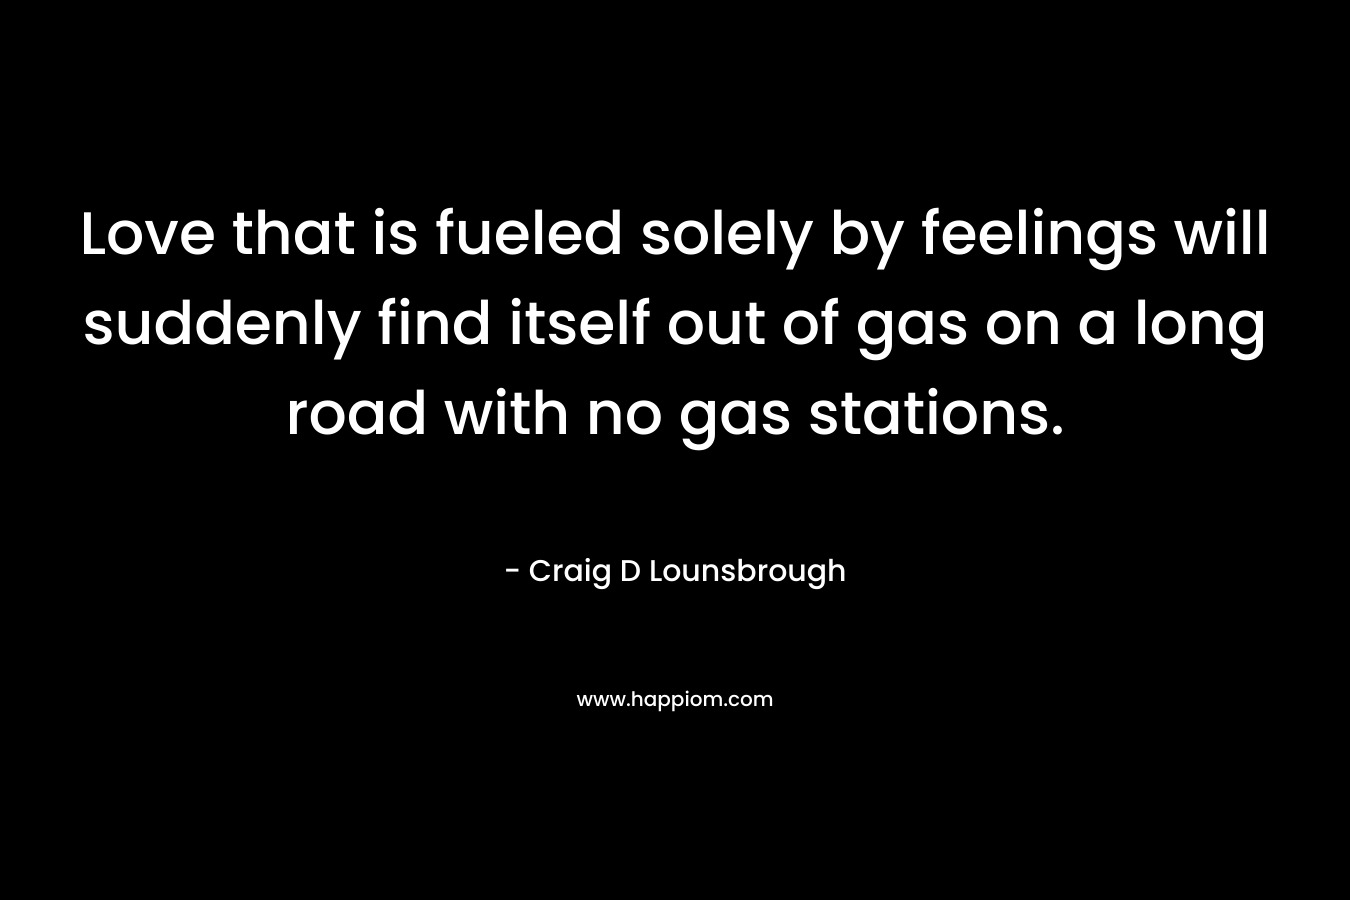 Love that is fueled solely by feelings will suddenly find itself out of gas on a long road with no gas stations.